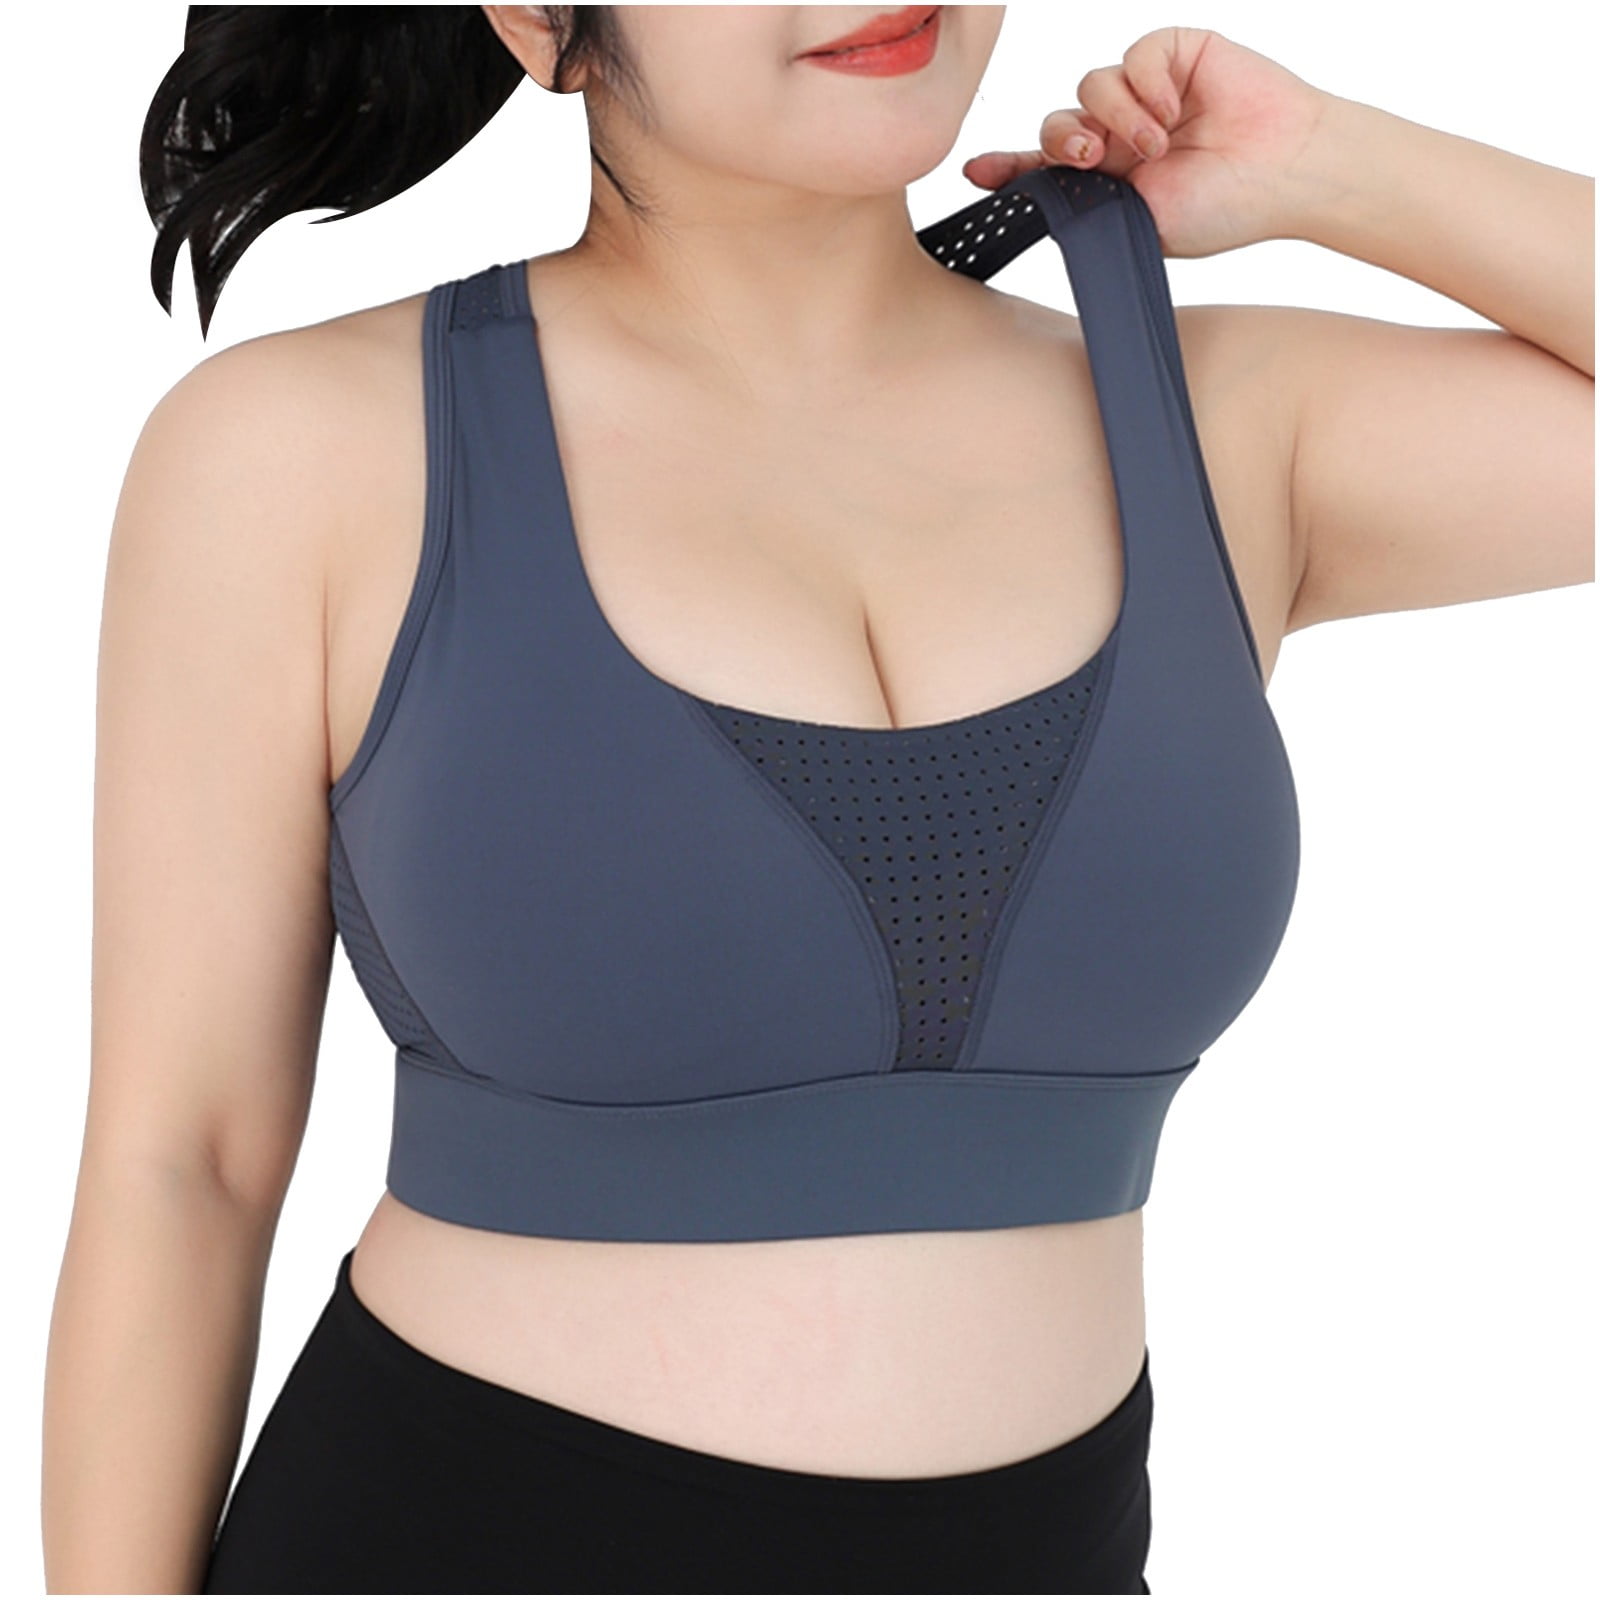 Low Impact Lycra Fabric Yoga Bra With Cross Back Support And Padded Female  Fitness Vest For Womens Workout And Female Fitness From Hchome, $18.71